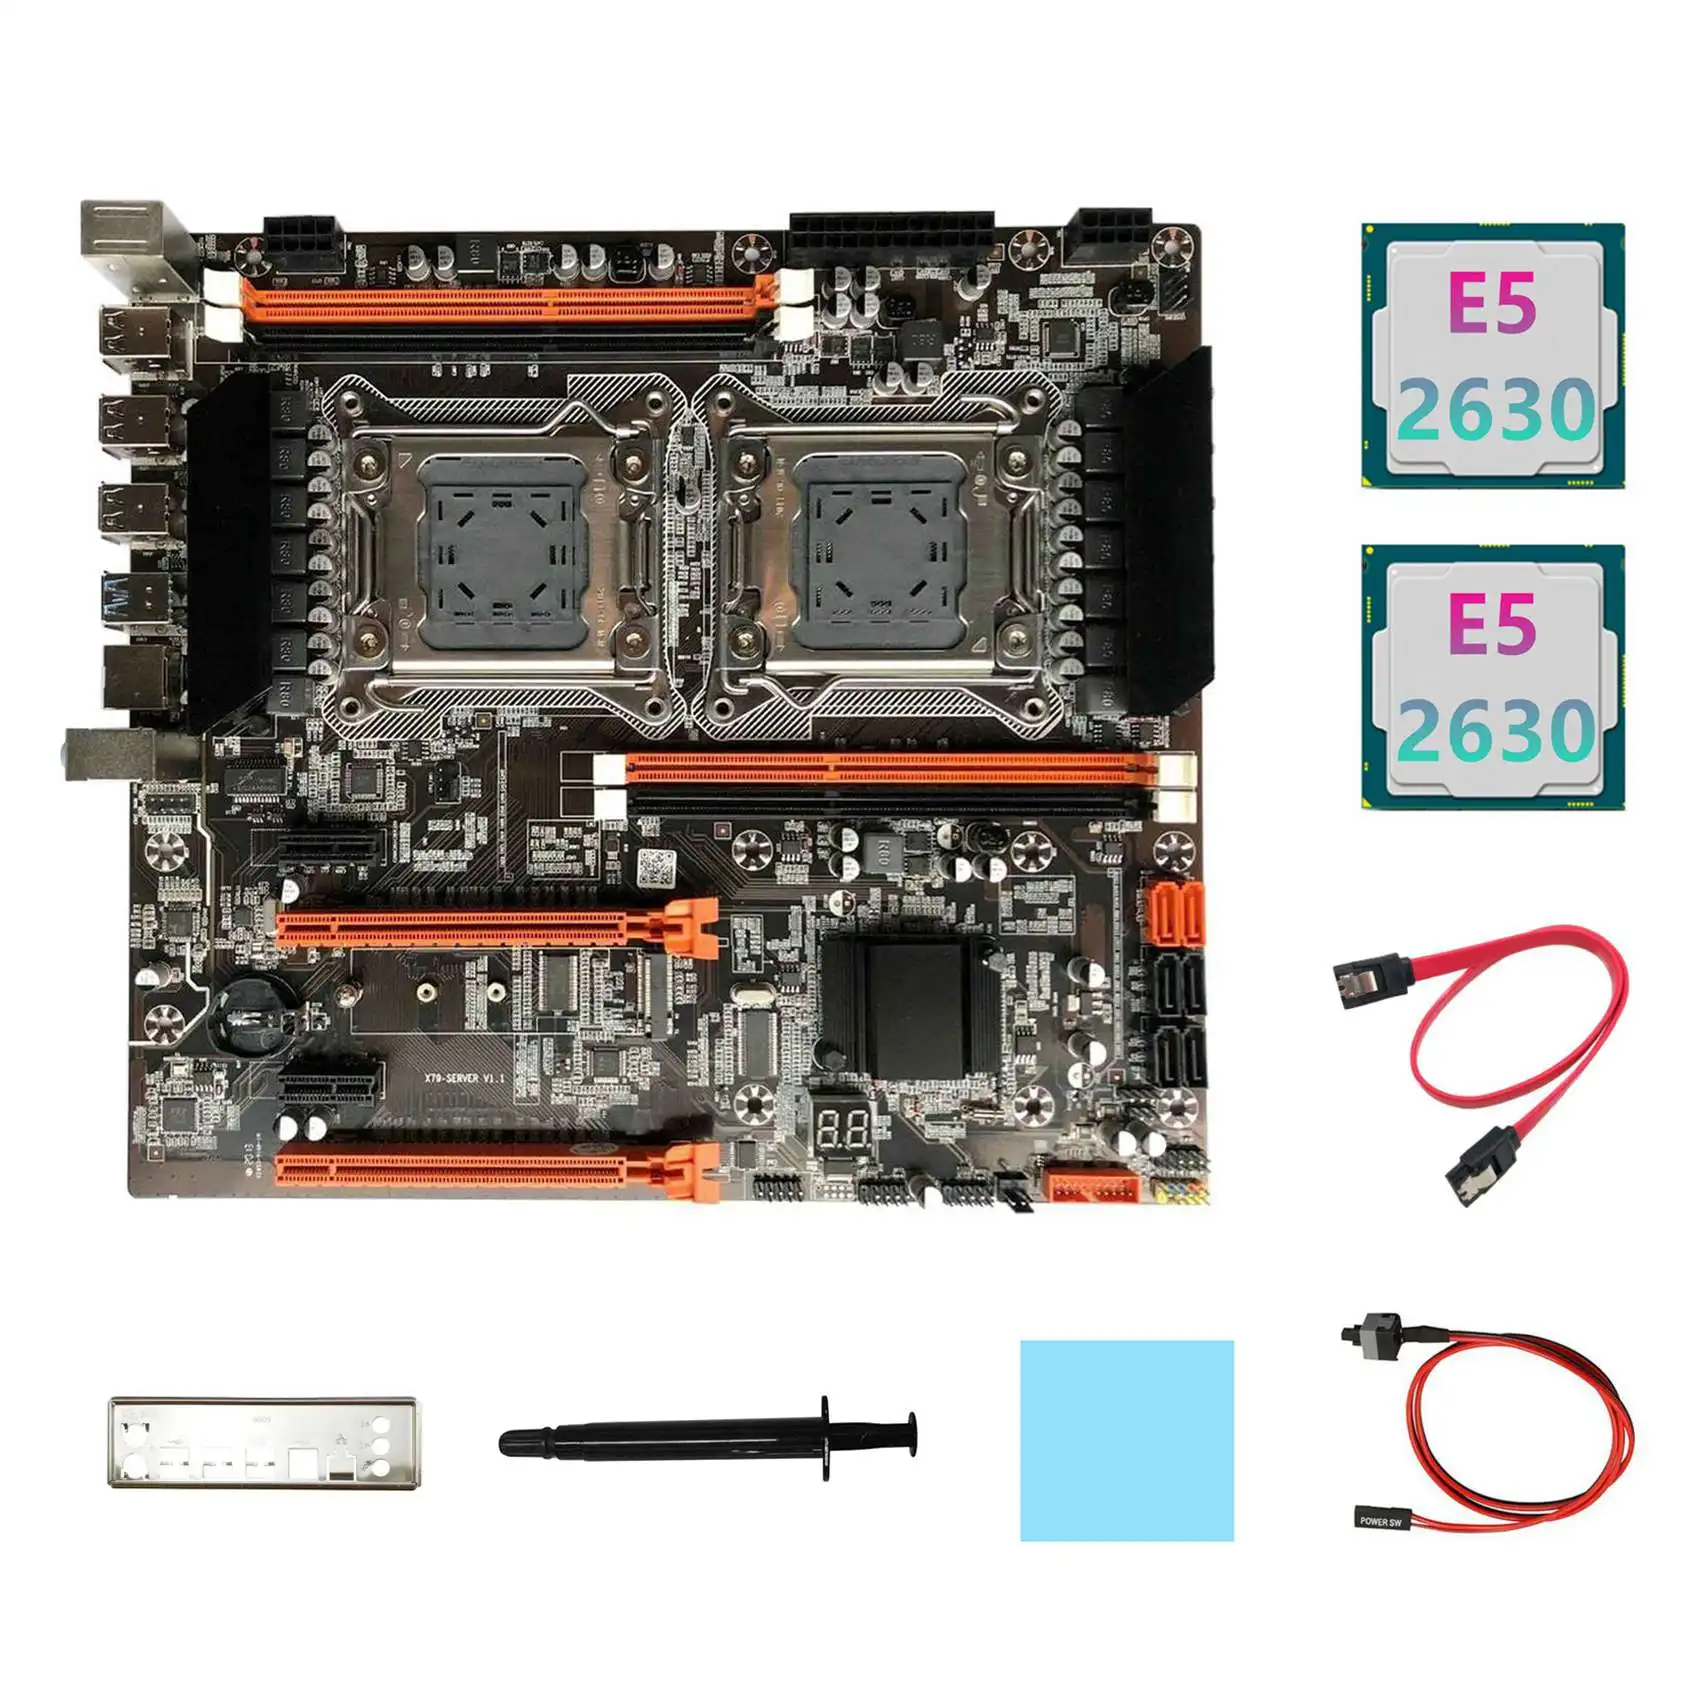 

X79 Dual CPU Motherboard+2XE5 2630 CPU+SATA Cable+Switch Cable+Baffle+Thermal Grease+Thermal Pad LGA2011 M.2 NVME X79